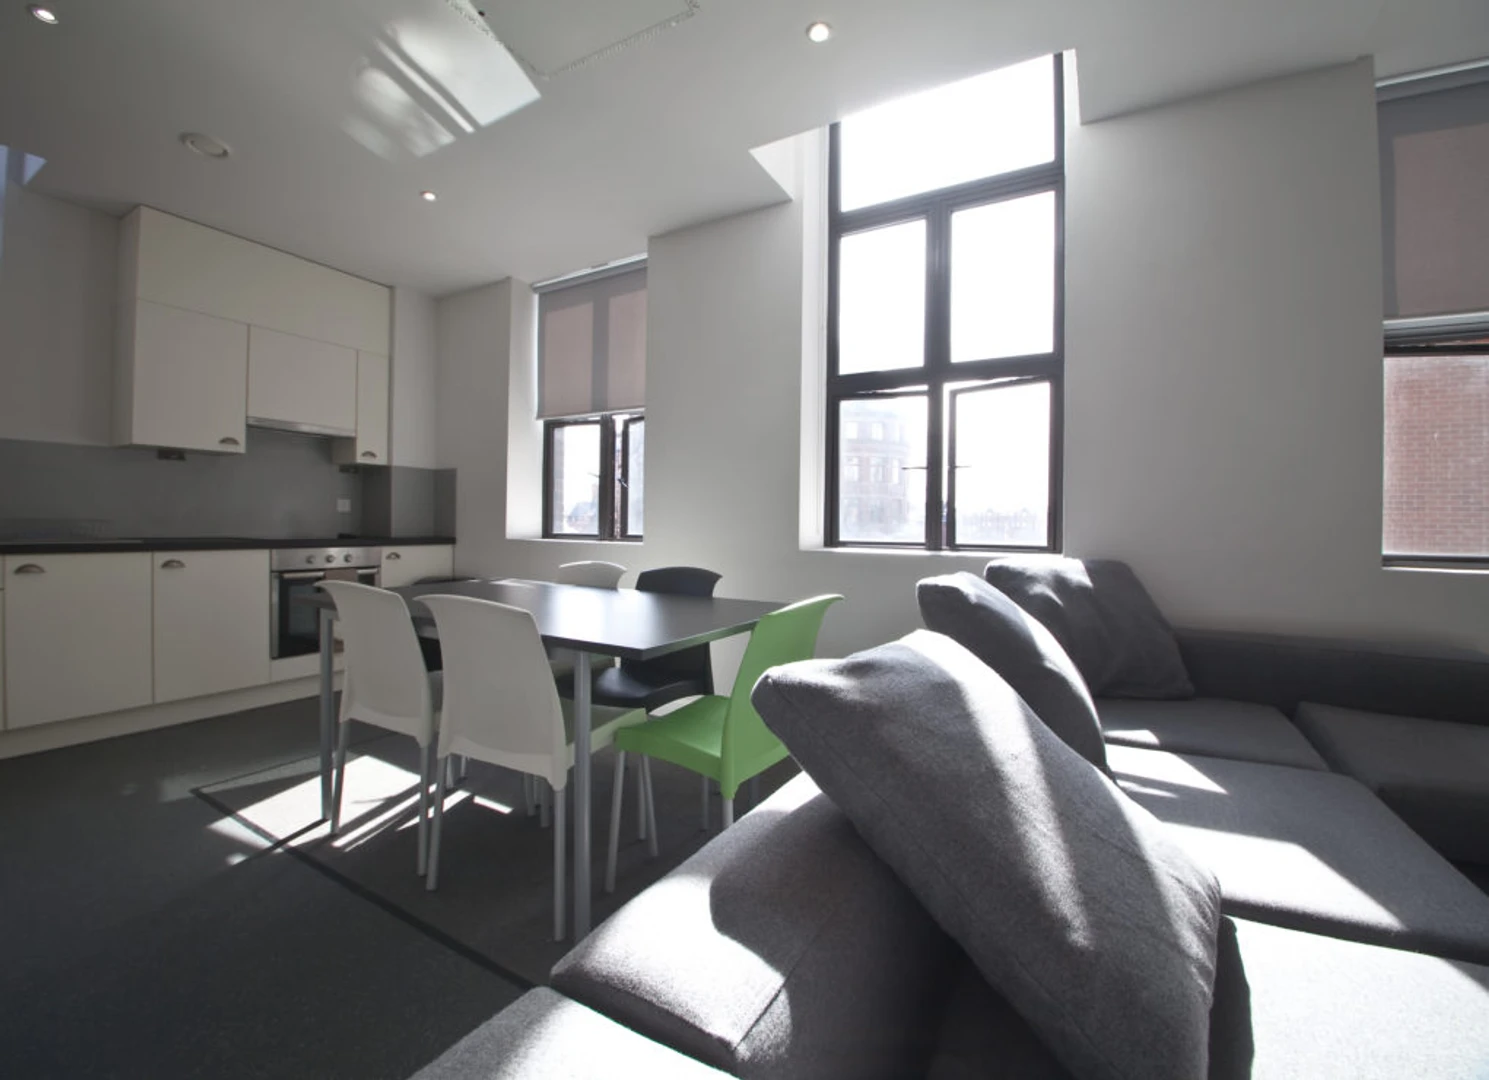 Accommodation with 3 bedrooms in Leeds